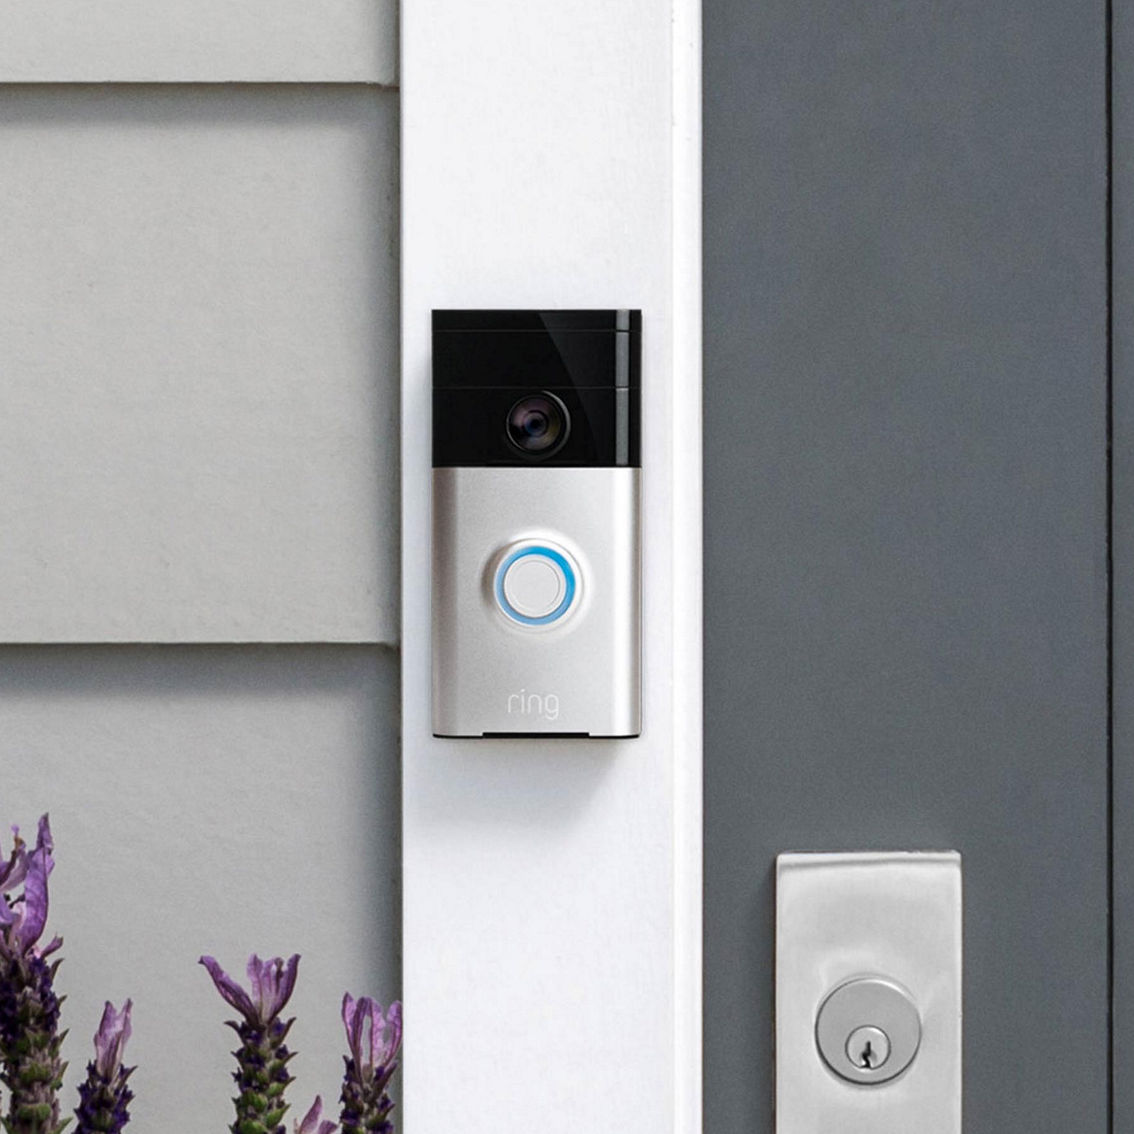 Ring Bot Home Automation Video Doorbell | Home Security | Electronics ...